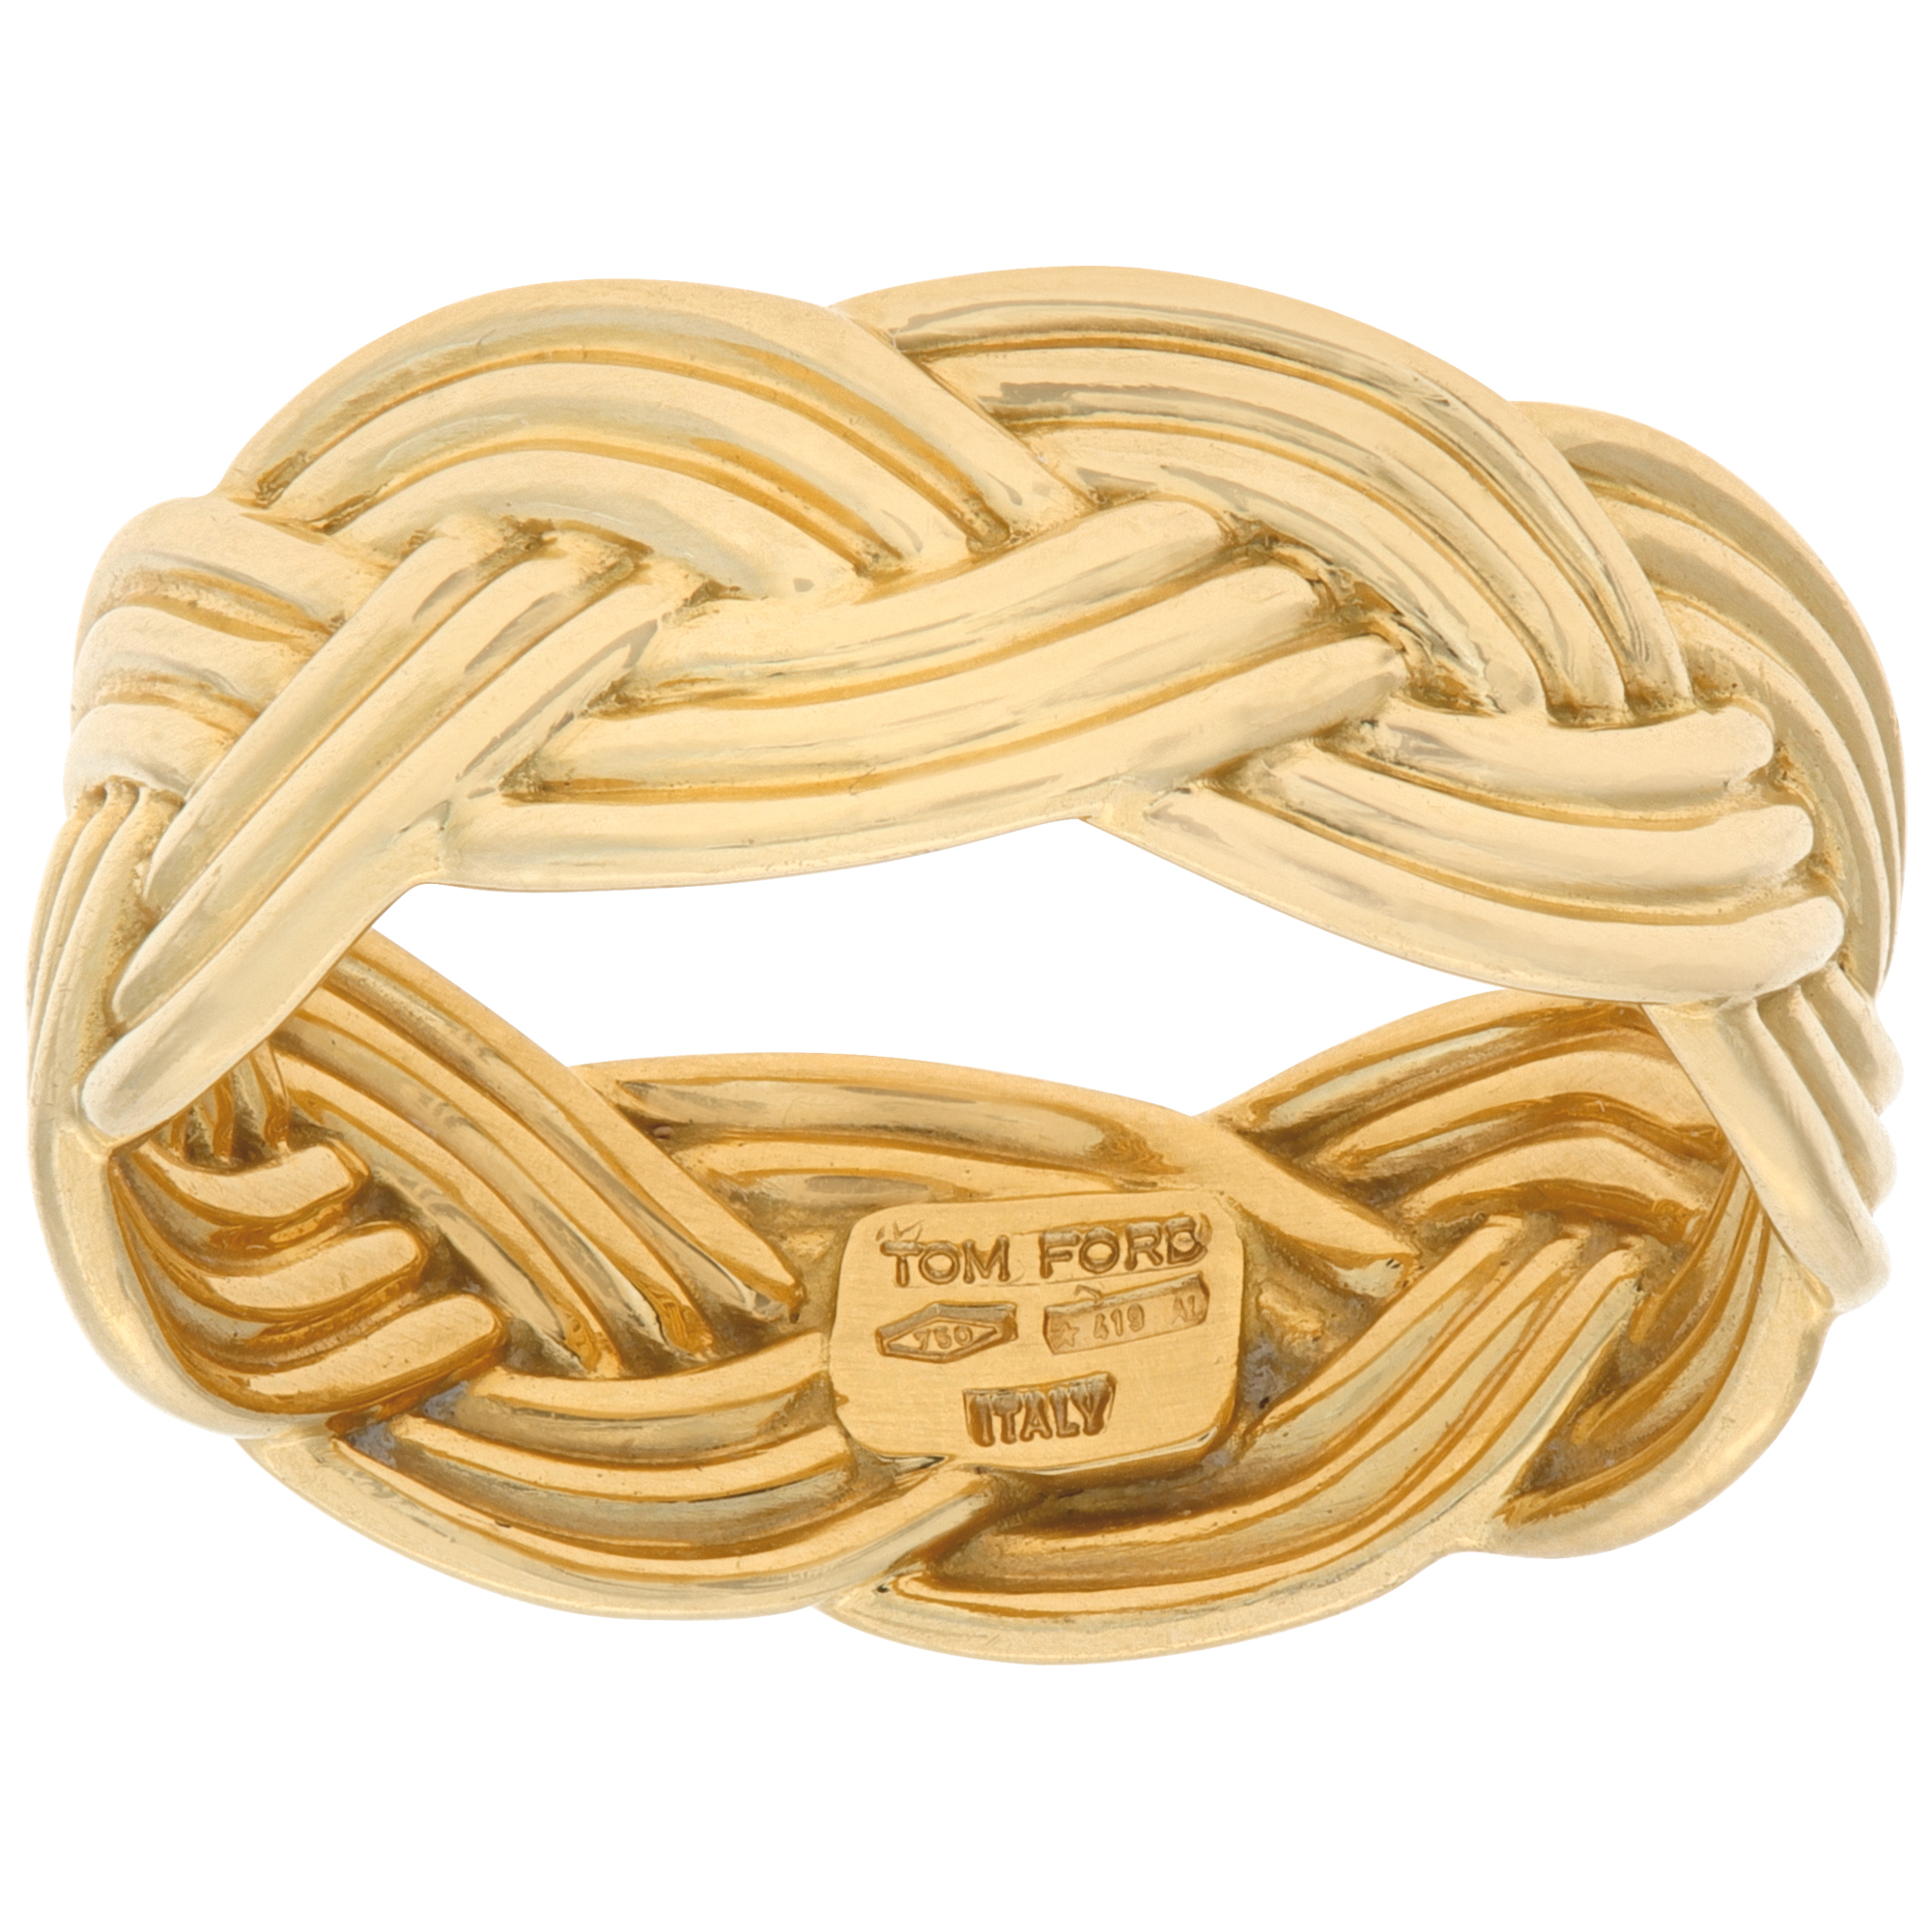 Tom Ford Braided ring in 18k yellow gold